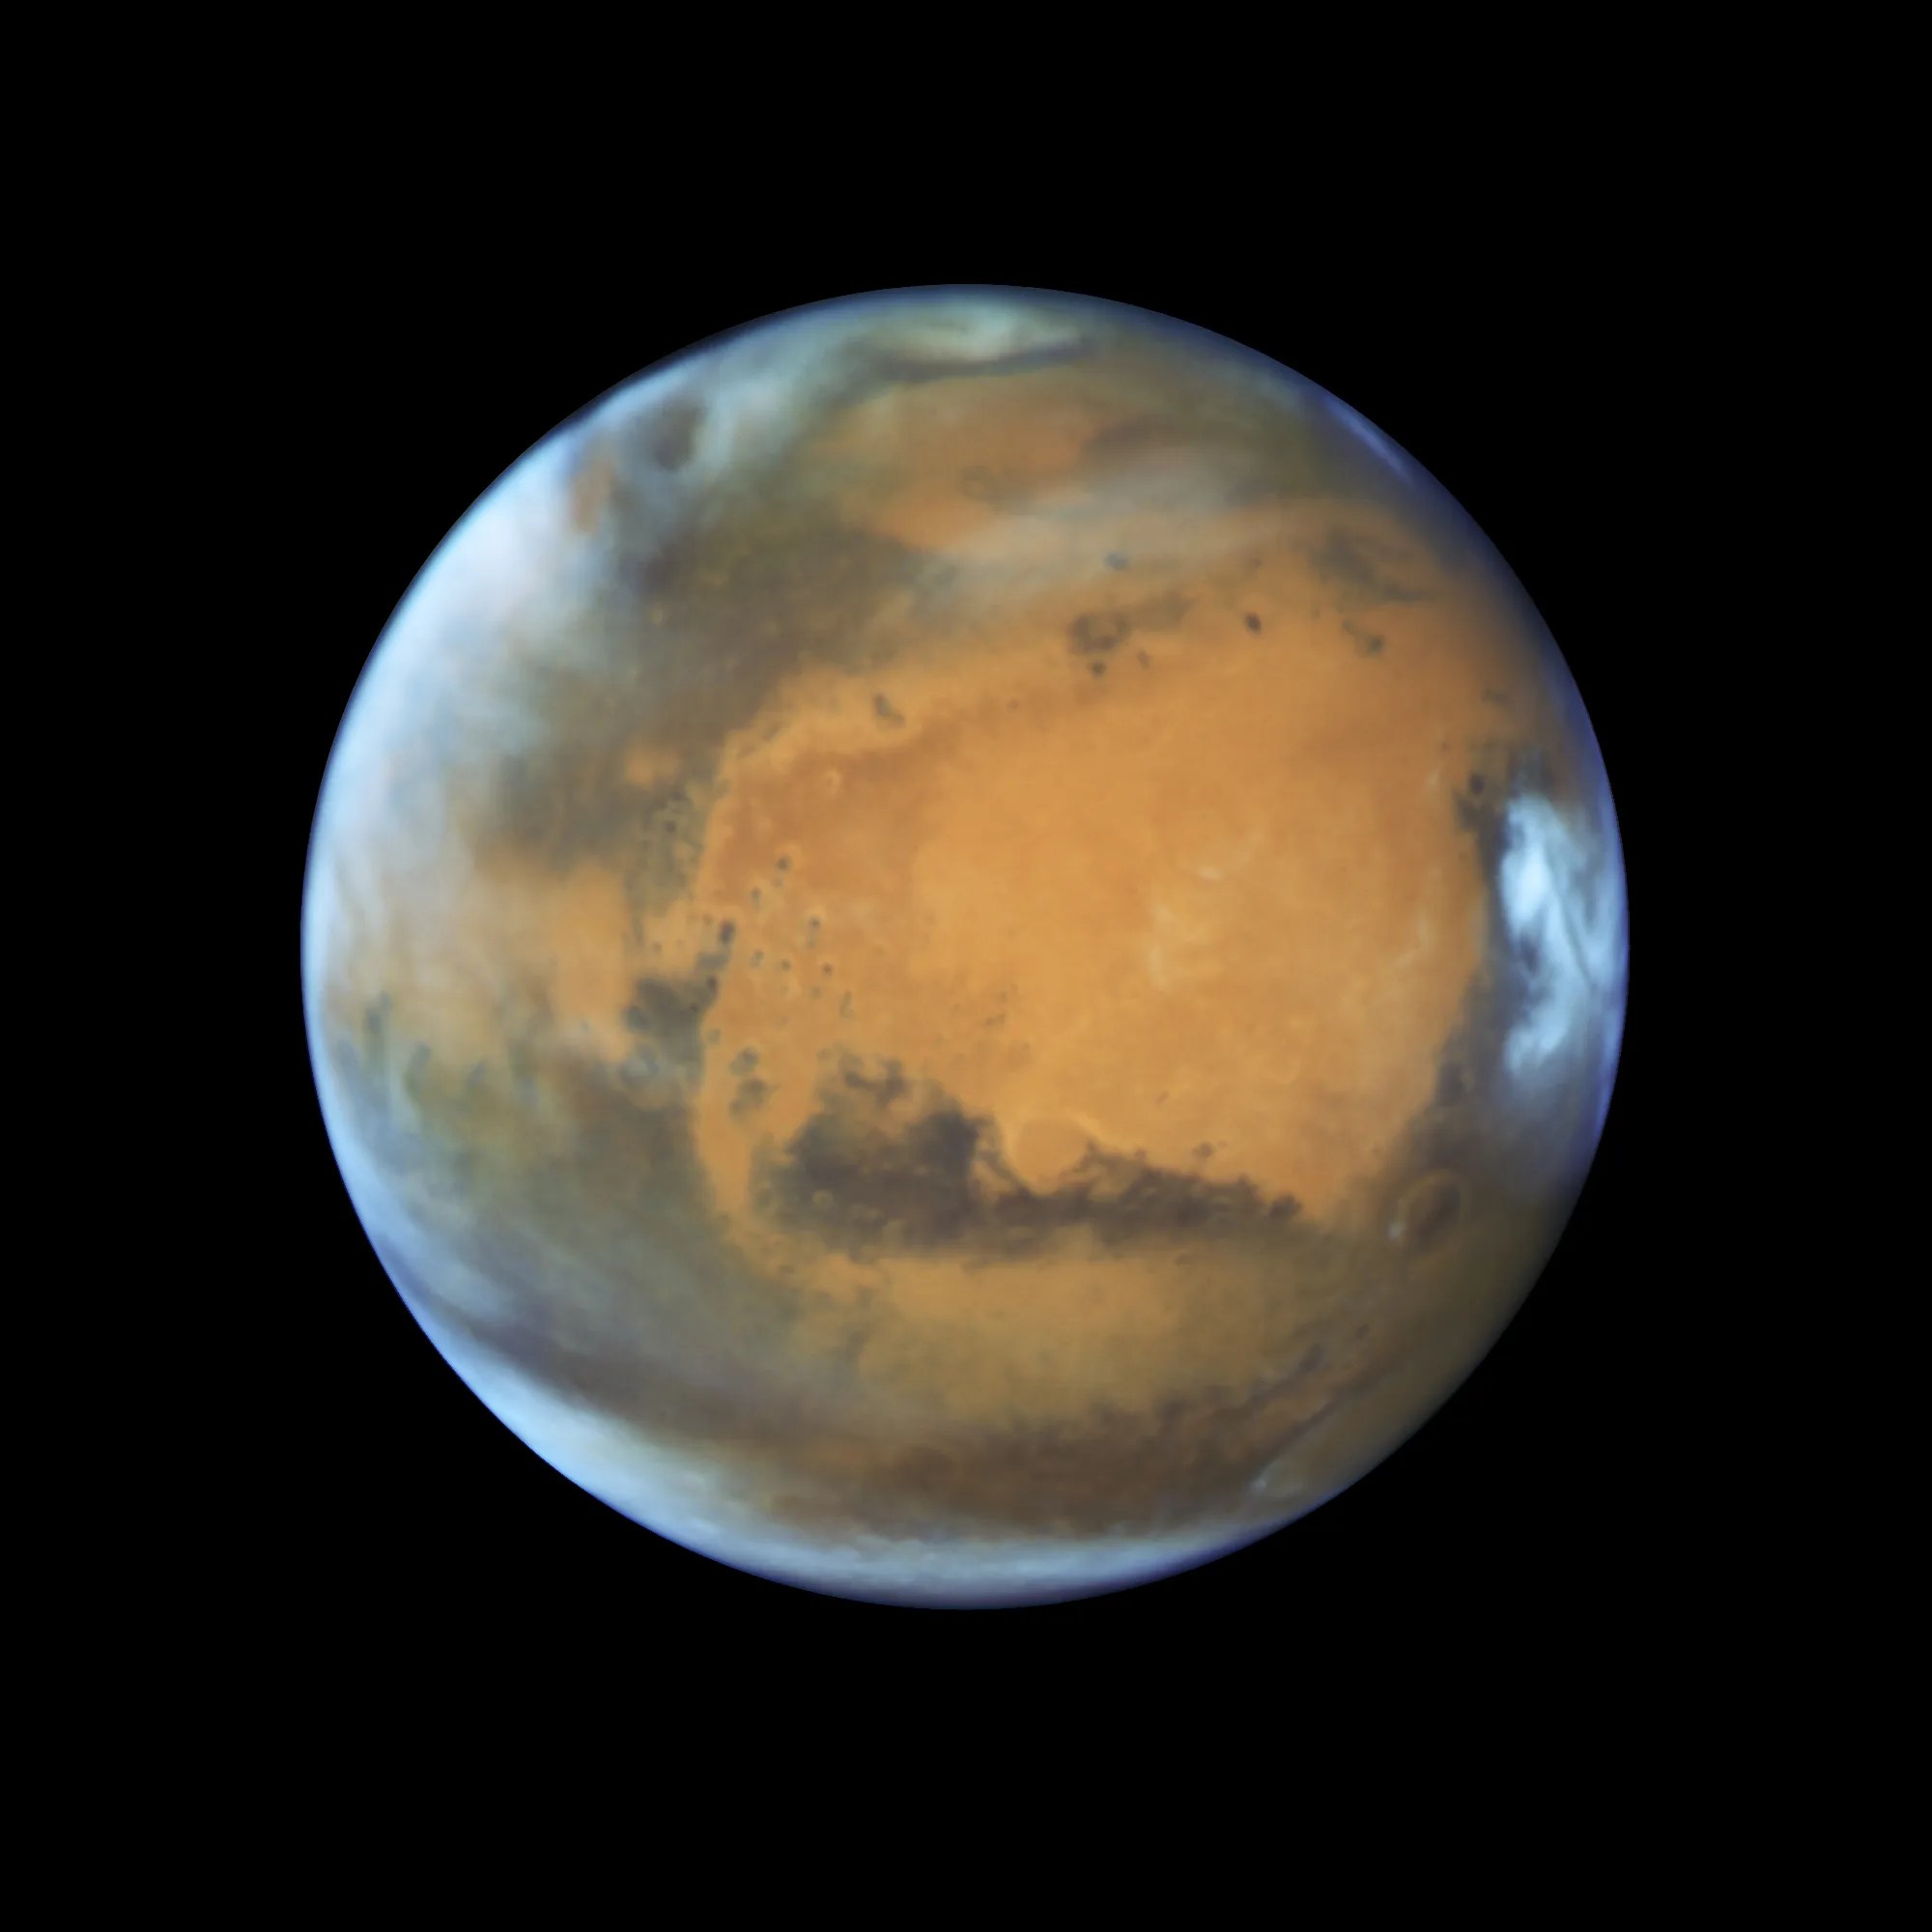 The disk of Mars is set against a black background. The planet is rusty-orange with darker grey areas. Bright-white clouds are visible along the left side of the sphere, and at the poles. An even brighter white patch is visible at the equator of the right limb.